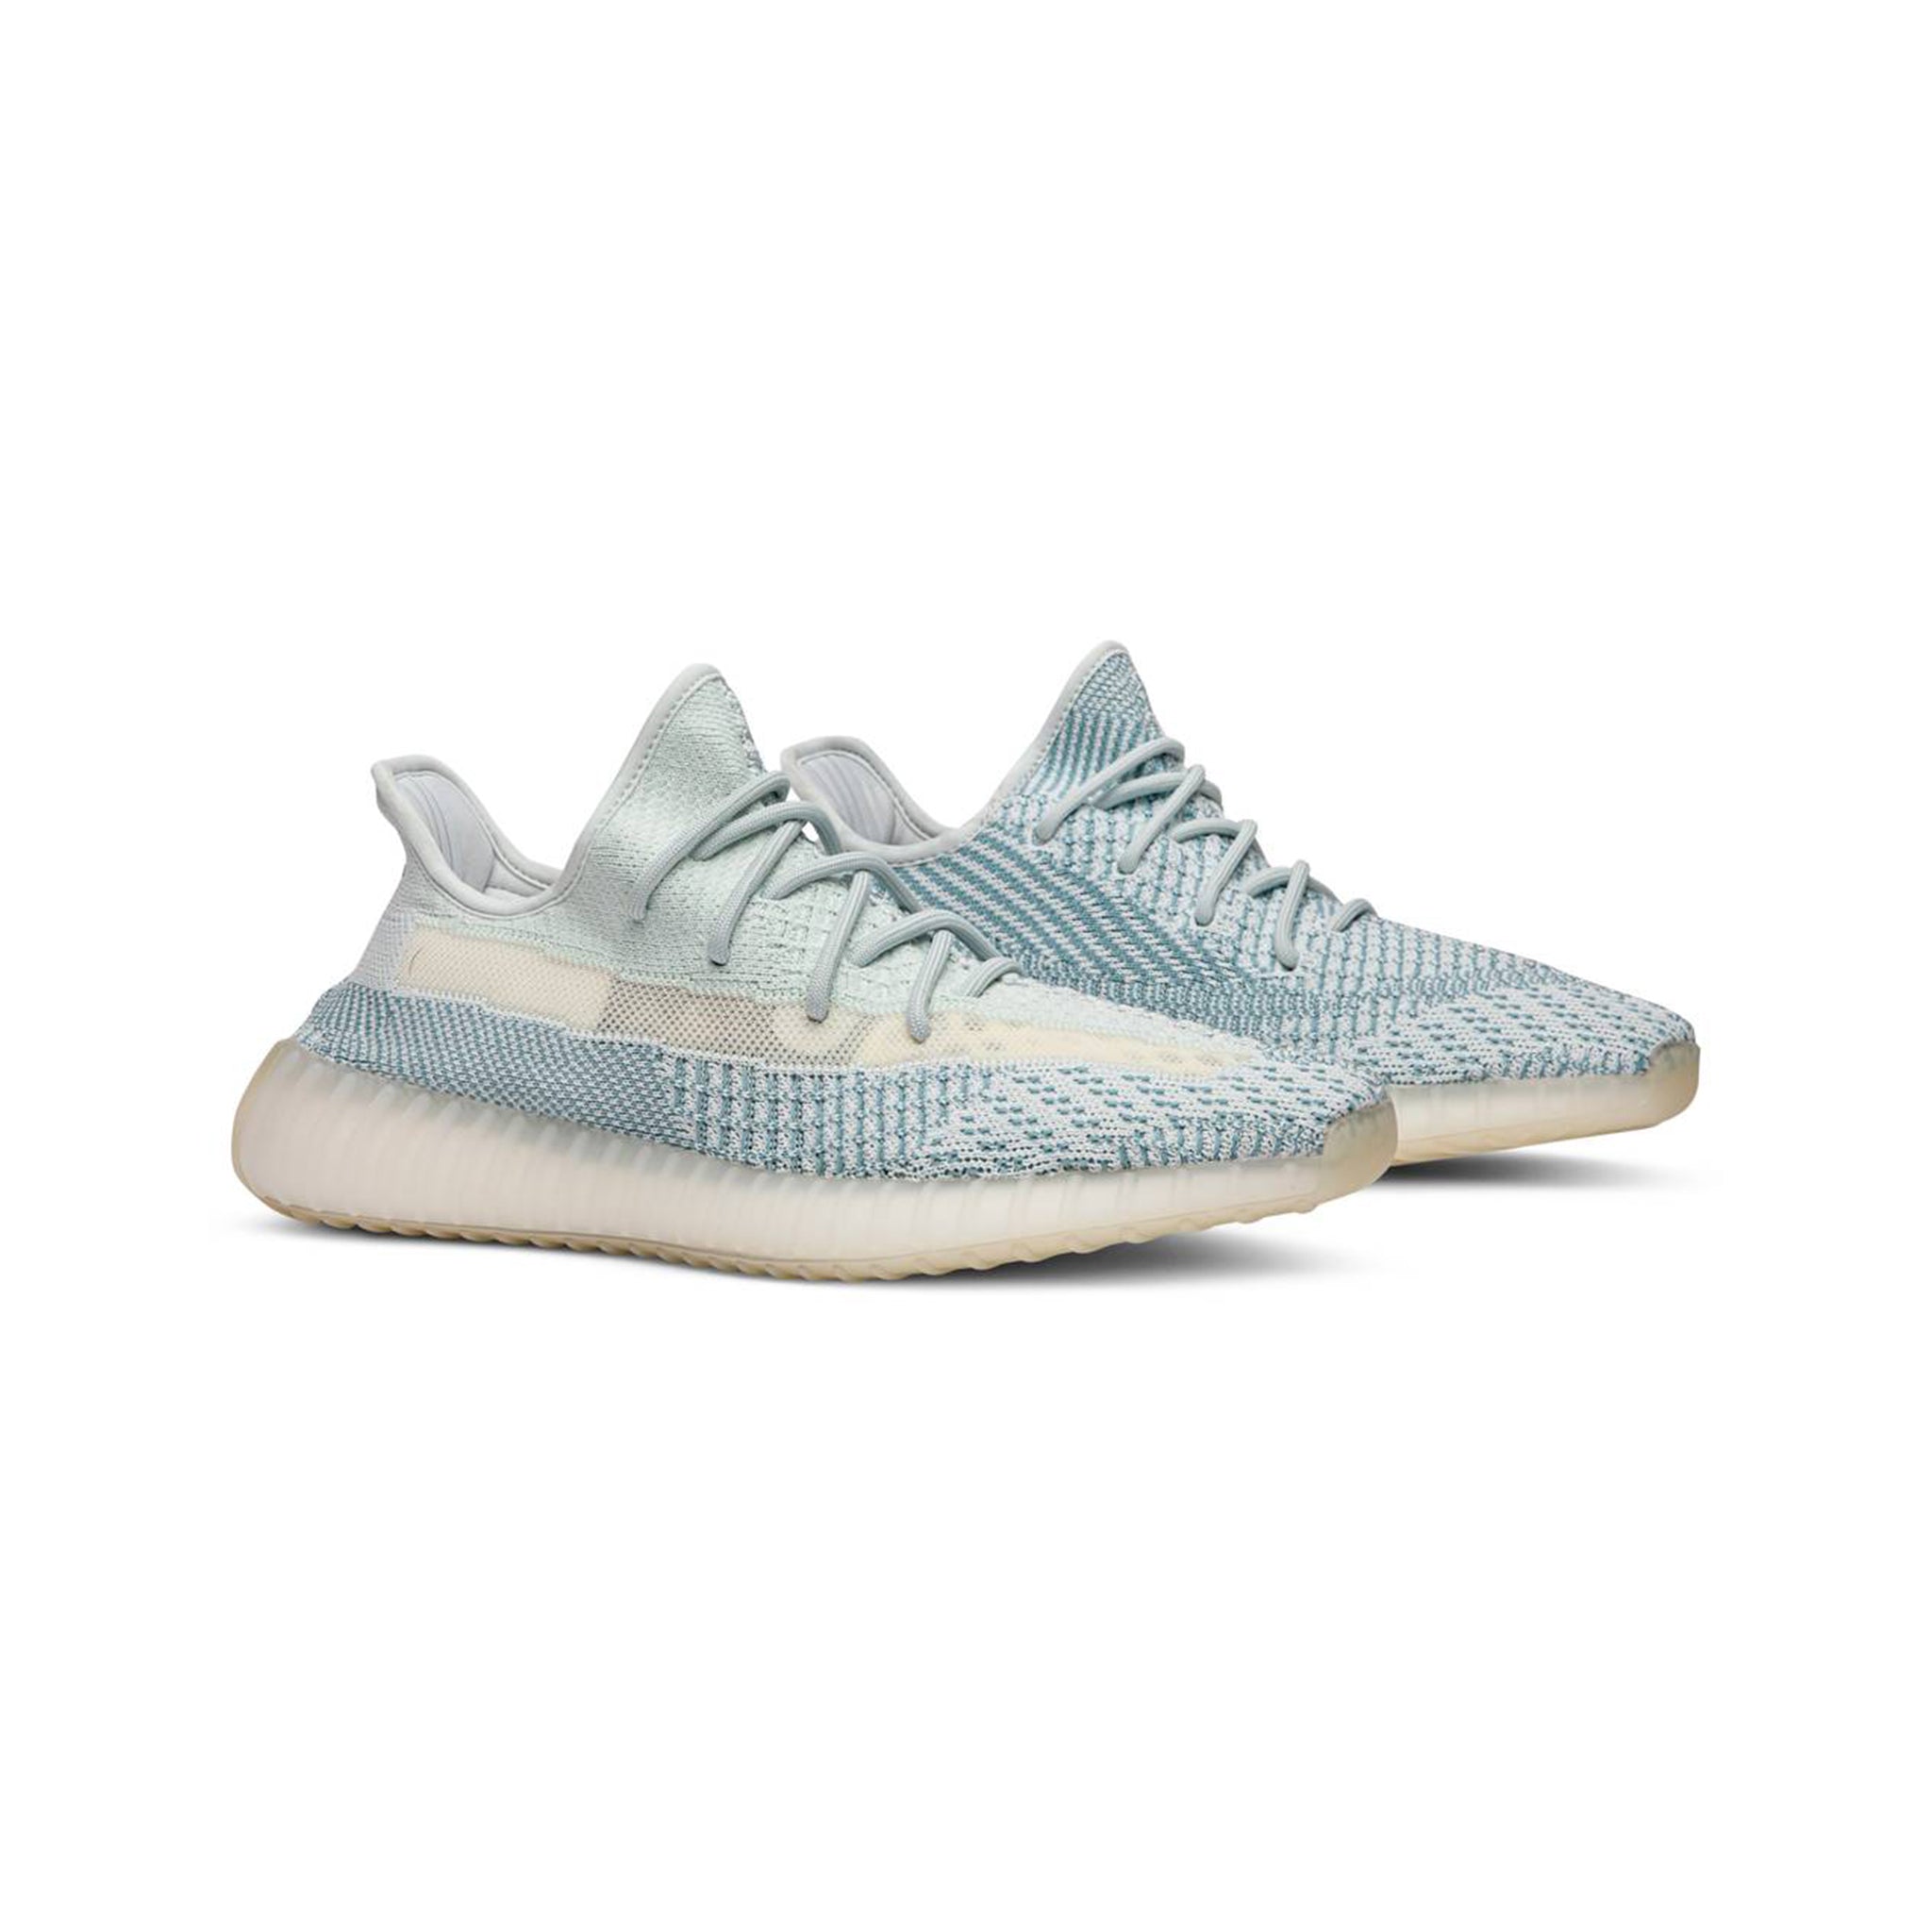 ADIDAS YEEZY BOOST 350 V2 CLOUD WHITE (NON-REFLECTIVE)